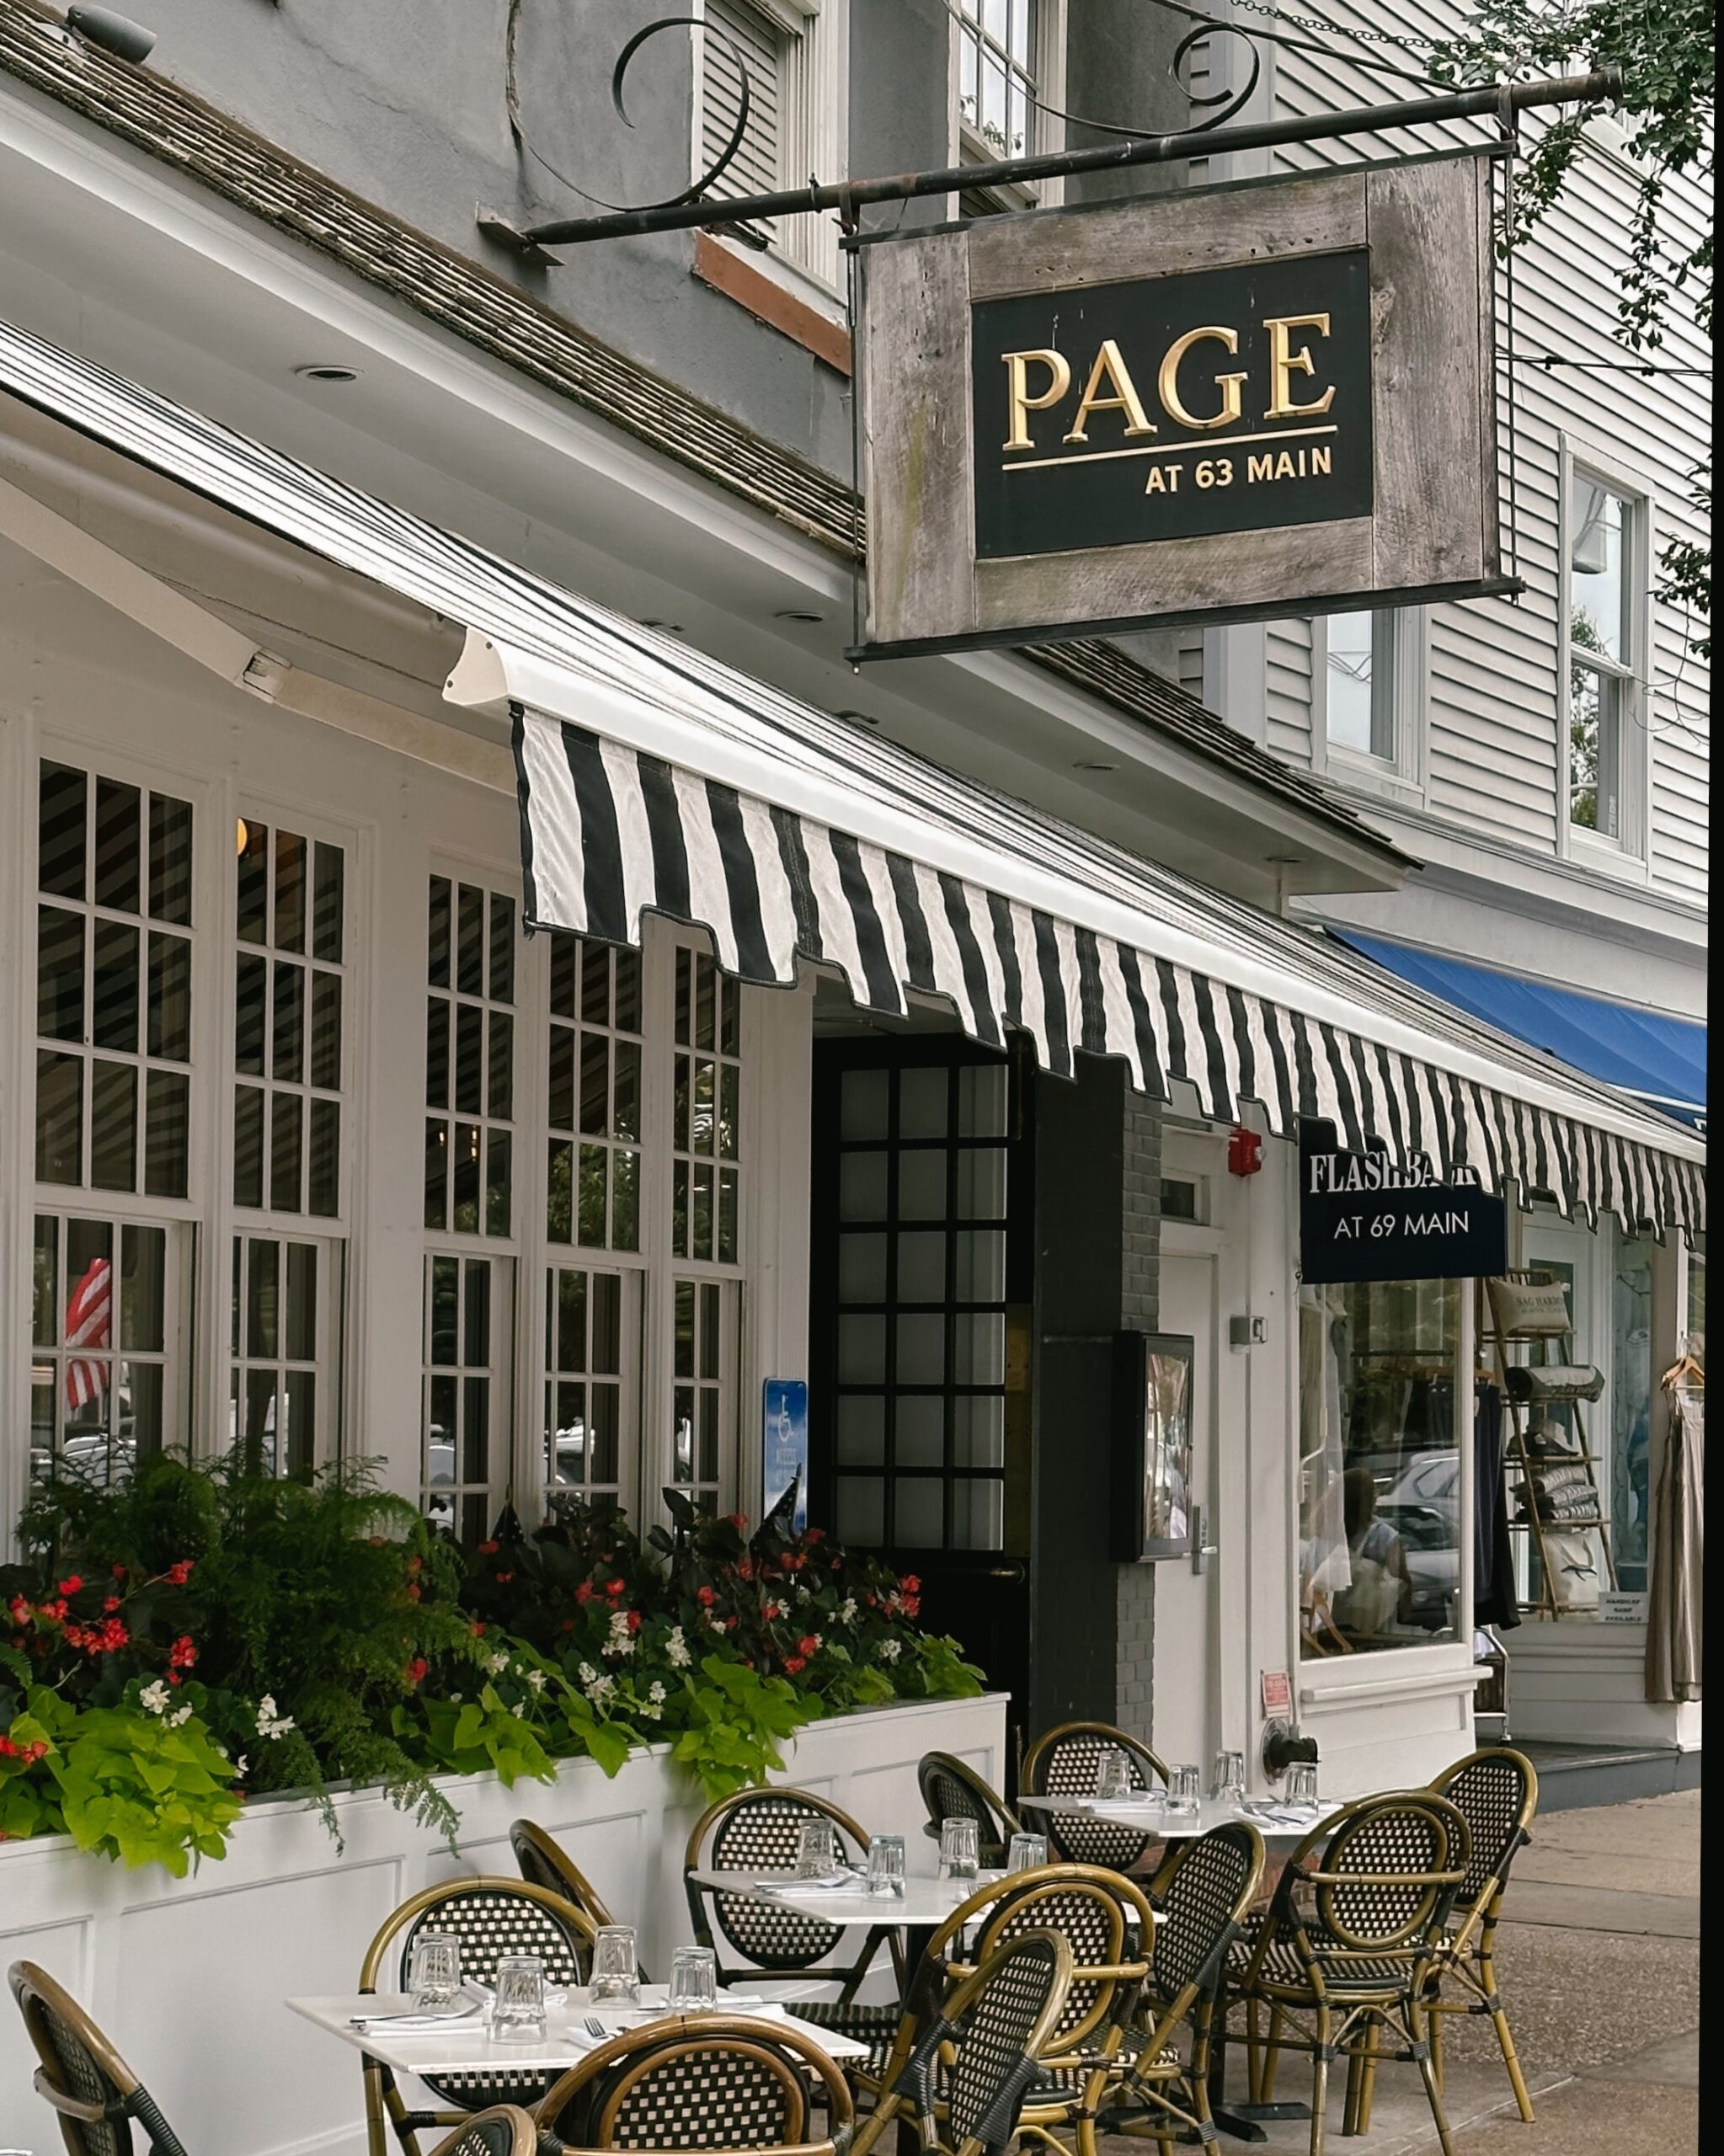 Photo of a building named "Page" in the Hamptons.